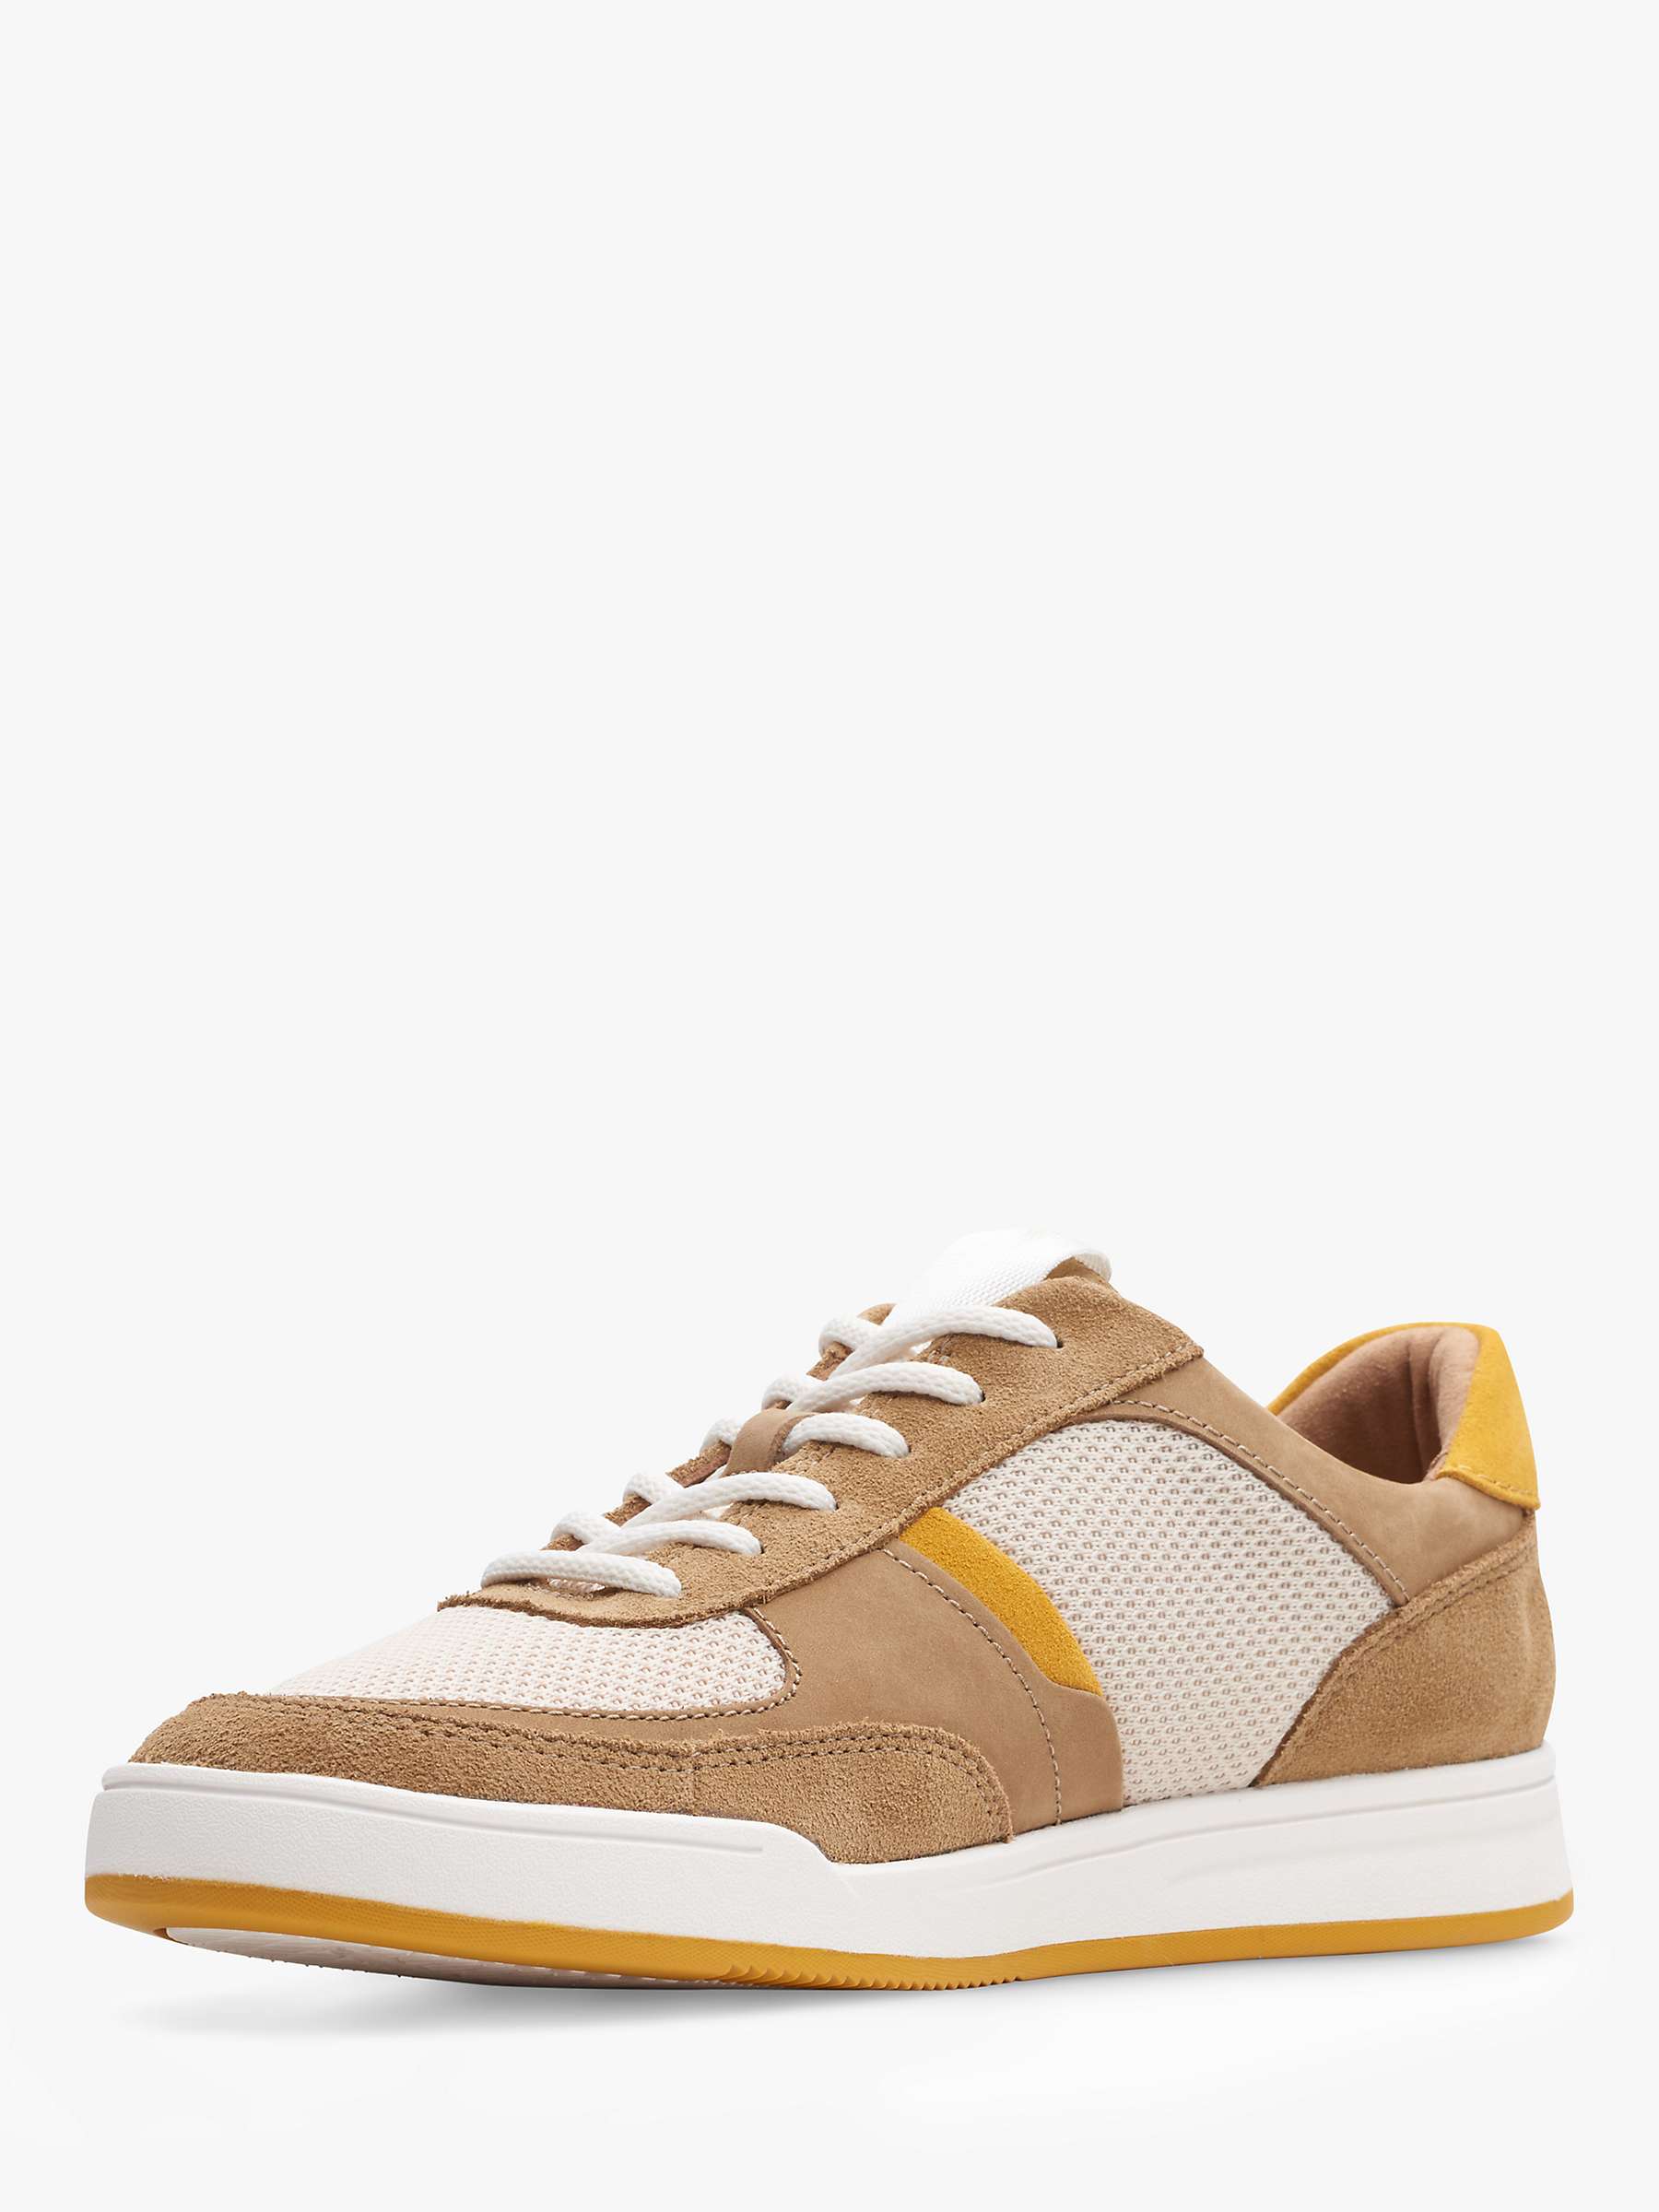 Buy Clarks Bizby Lace Up Combi Trainers Online at johnlewis.com